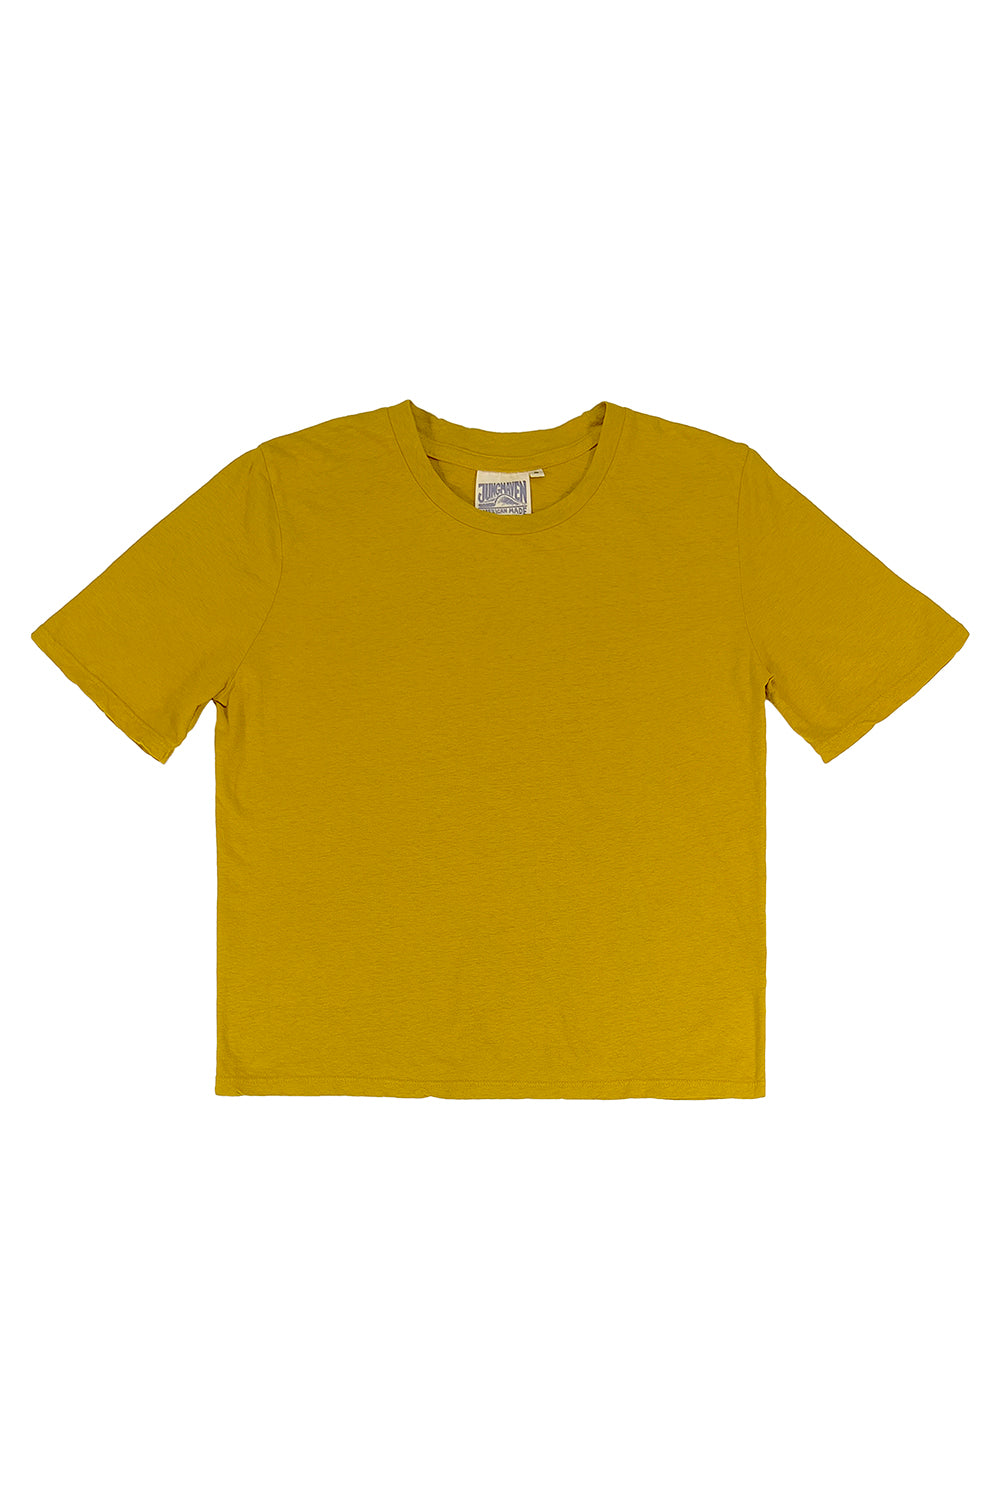 Silverlake Cropped Tee | Jungmaven Hemp Clothing & Accessories / Color: Spicy Mustard